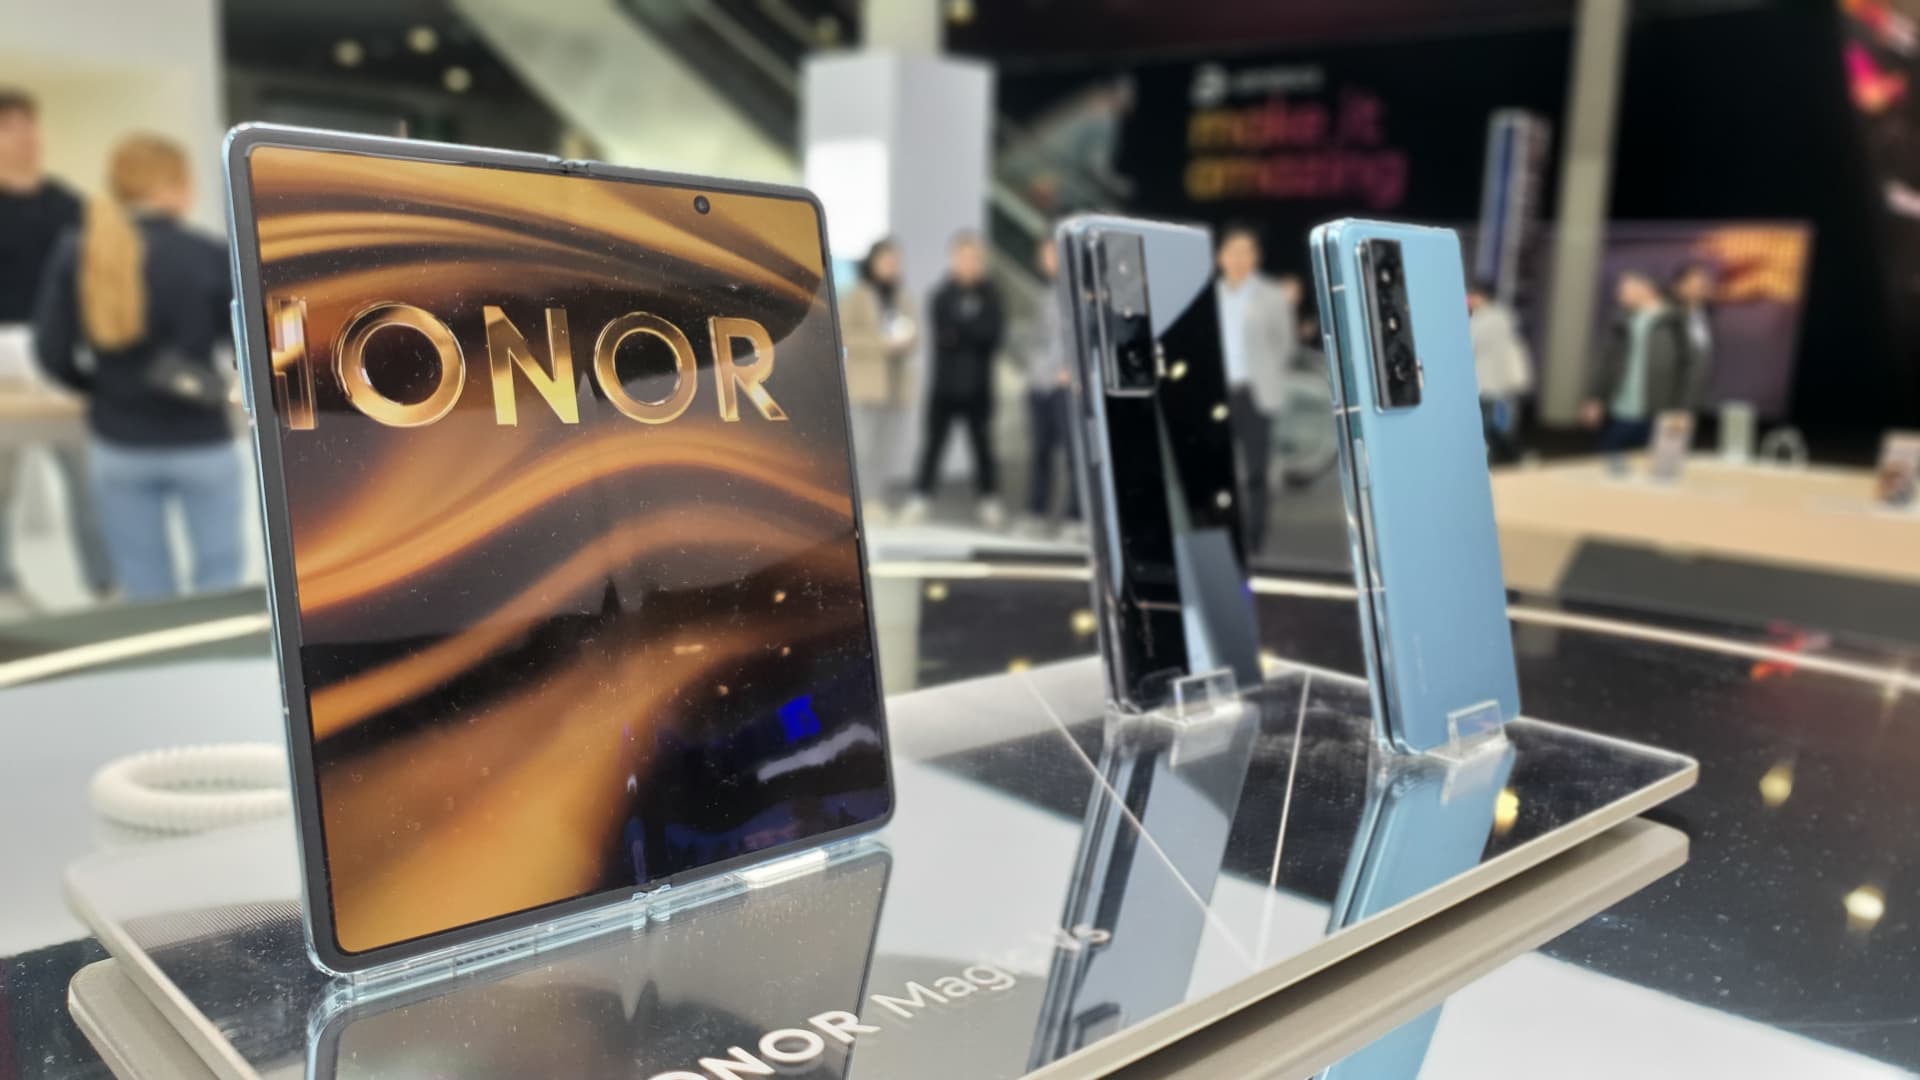 Huawei smartphone spinoff Honor plans IPO